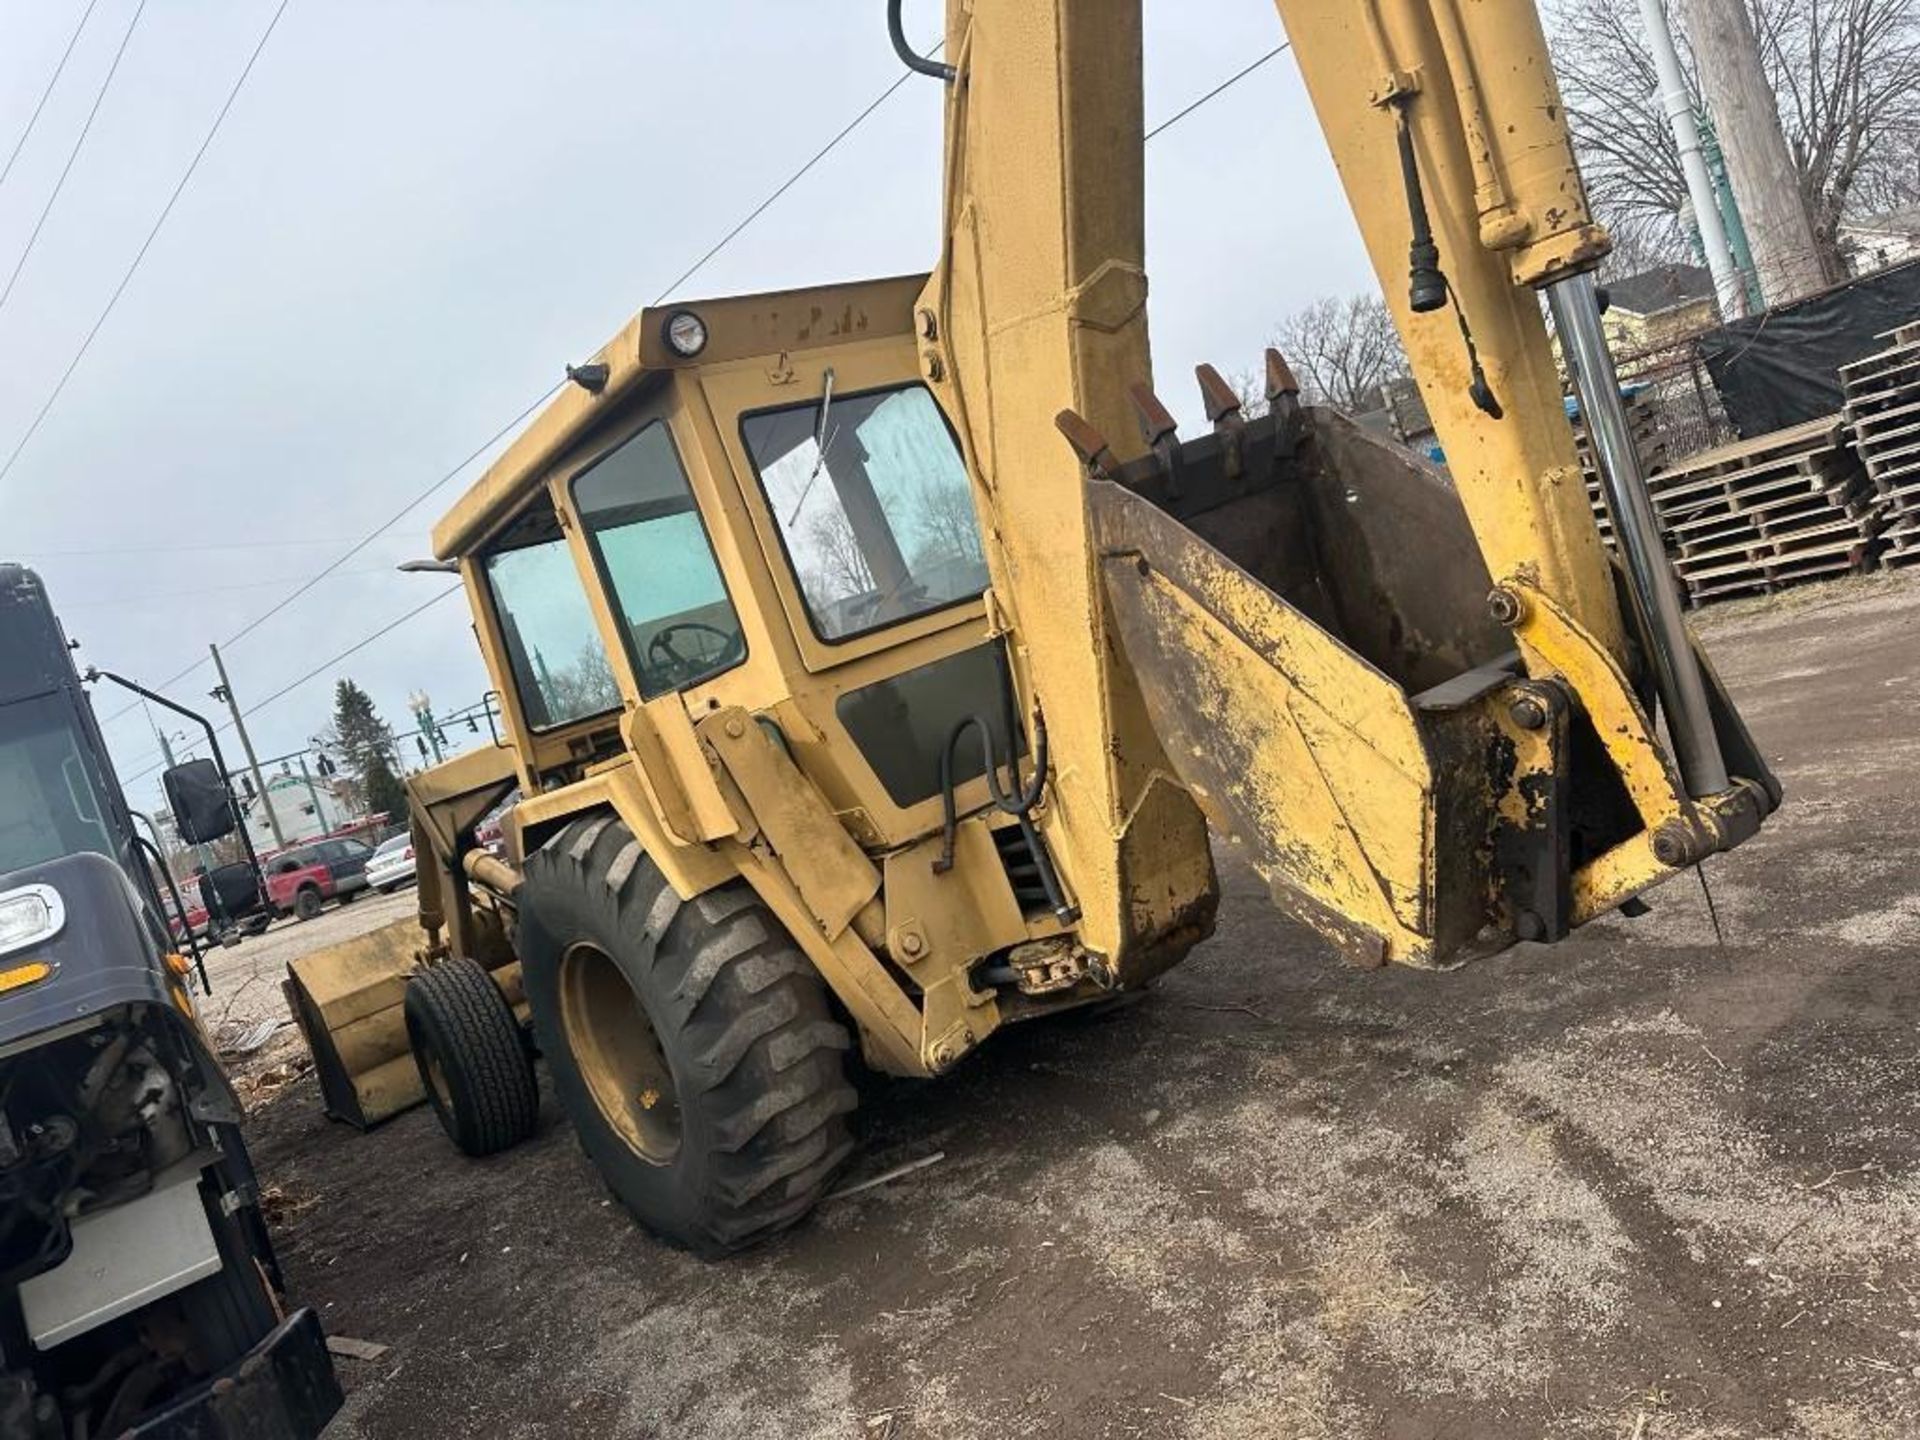 Ford 750 backhoe (located off-site, please read description) - Image 2 of 12